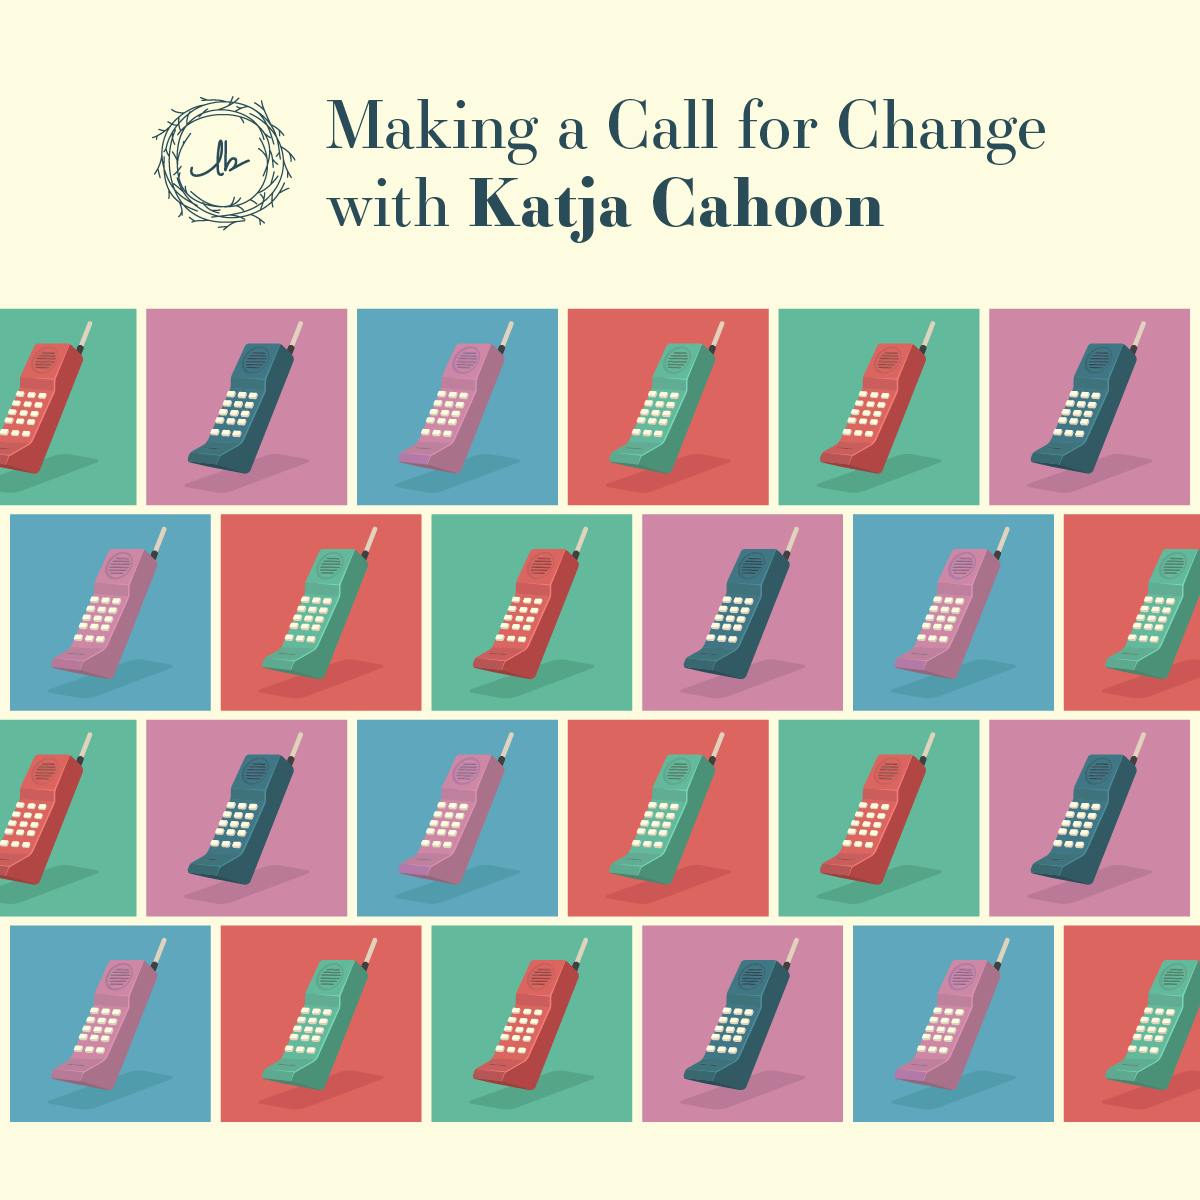 Making a Call for Change with Katja Cahoon